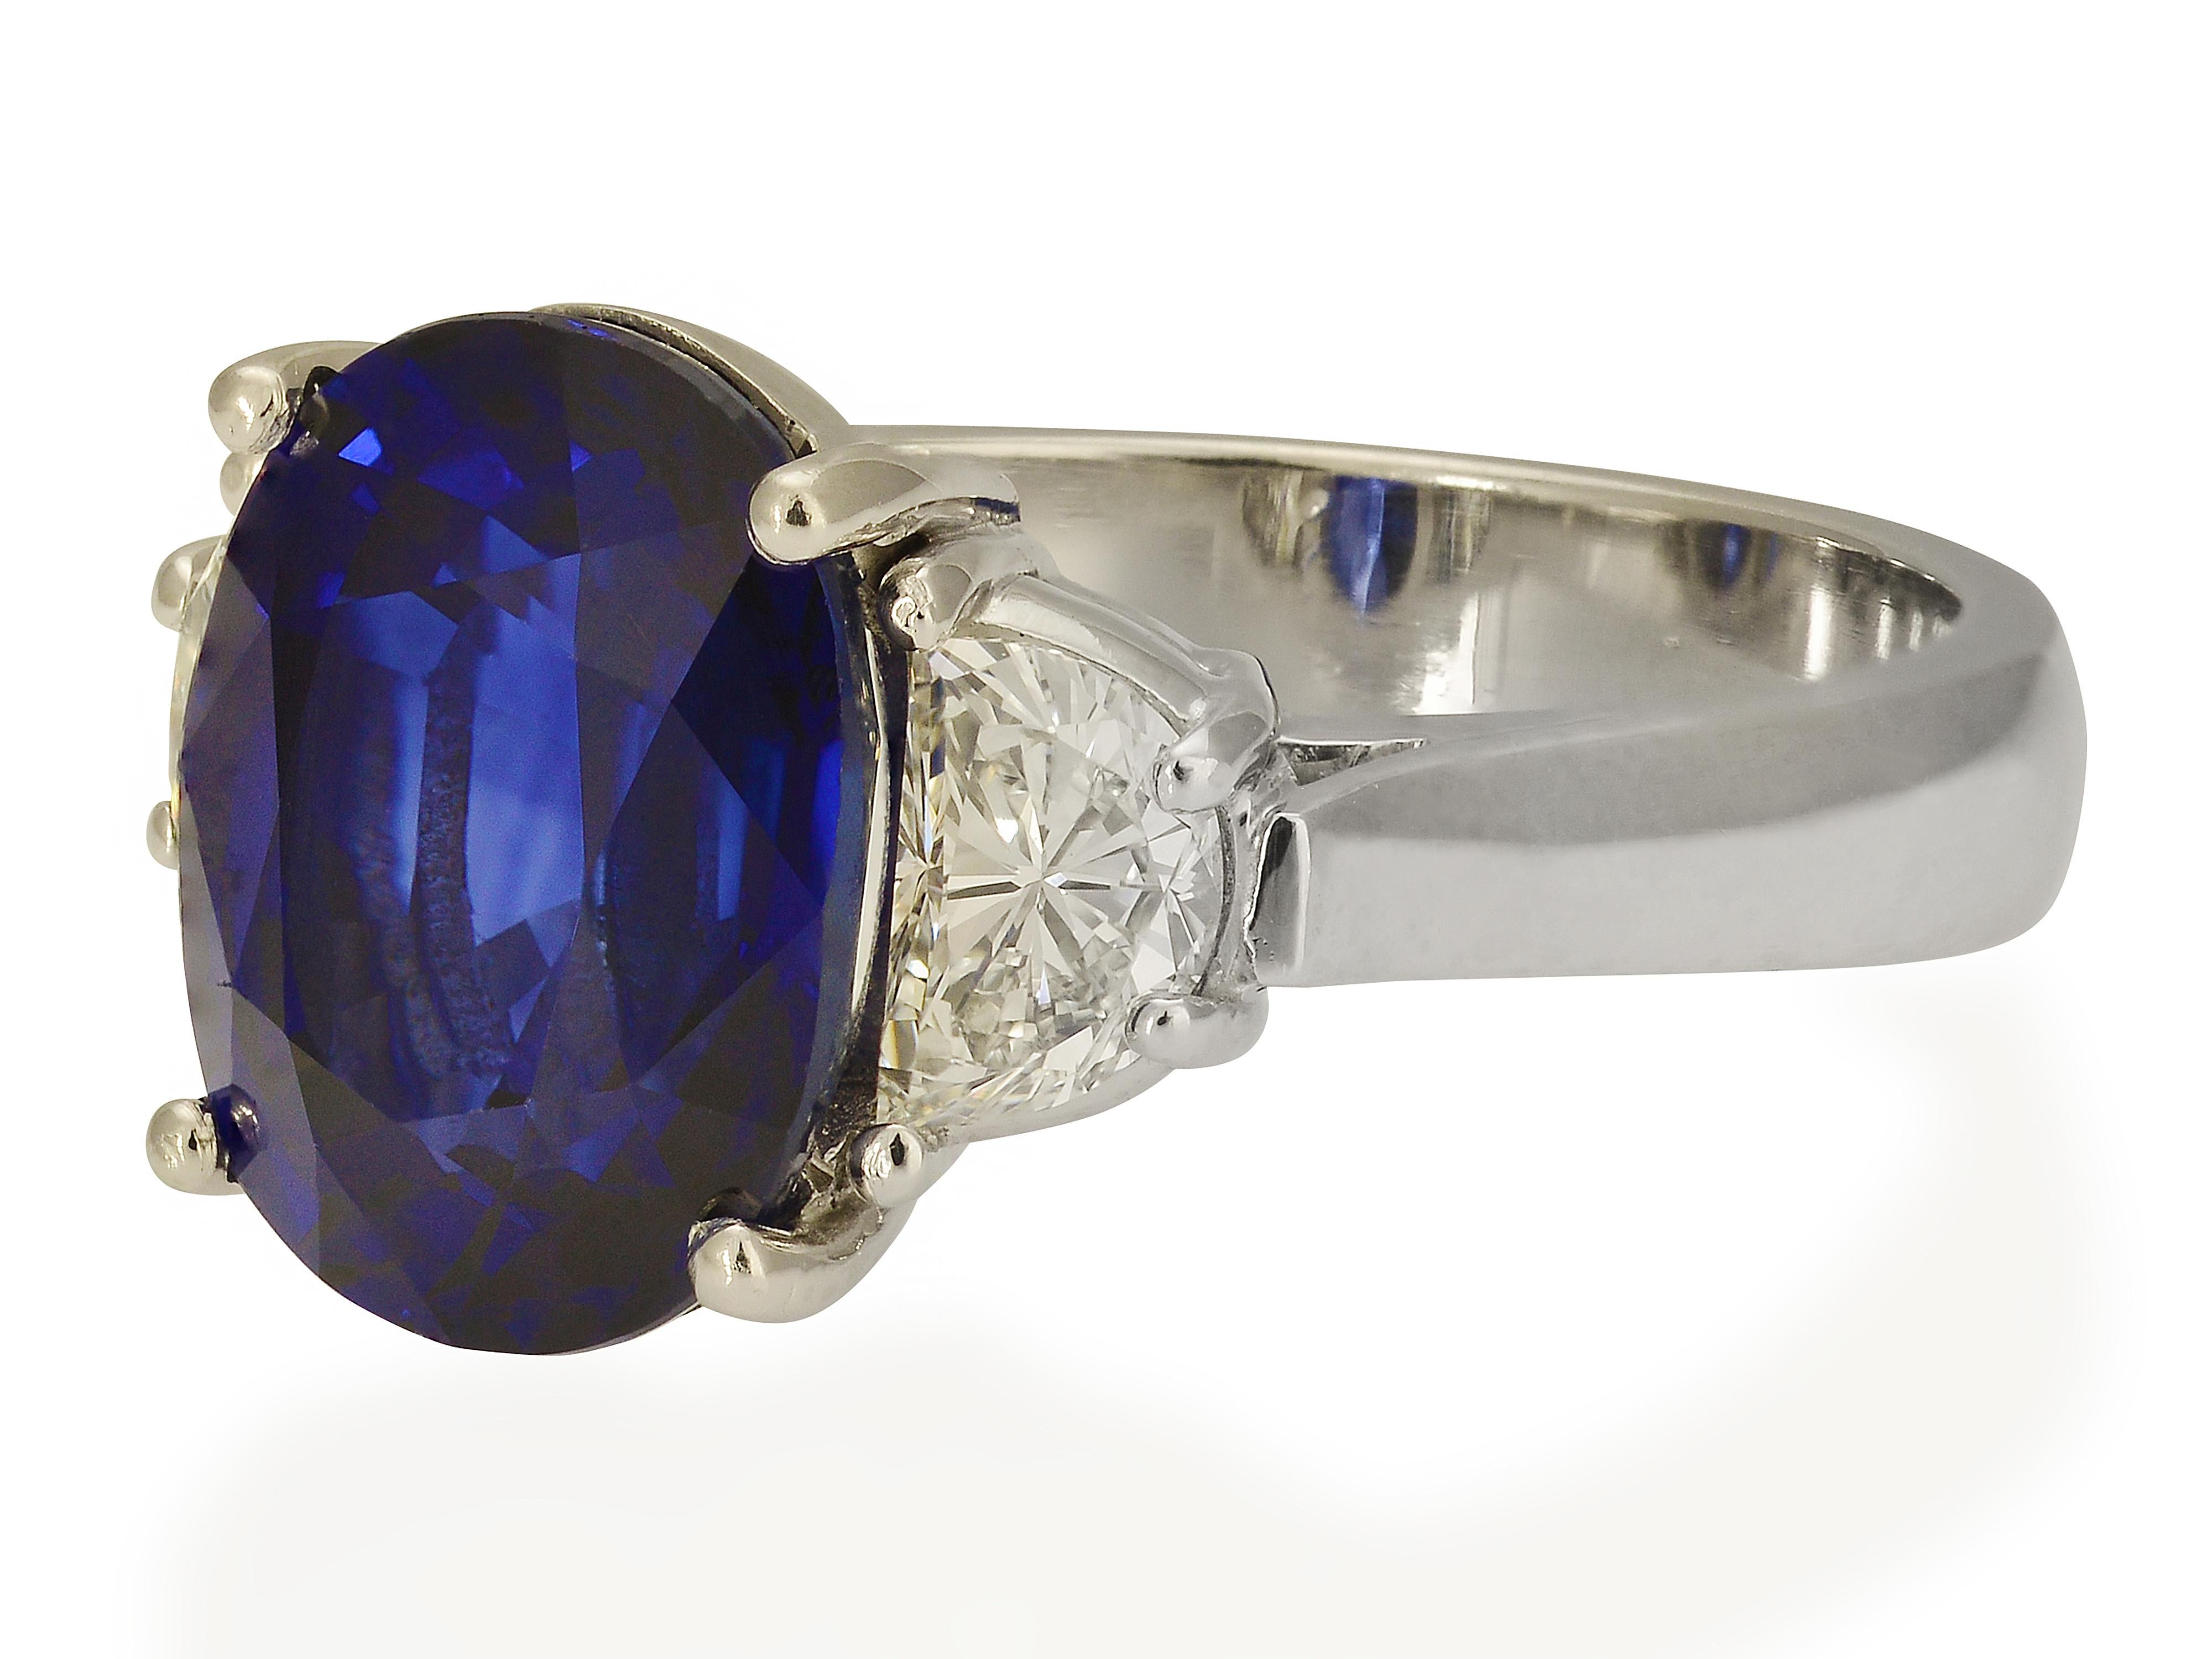 Platinum Cocktail 3 Stone Ring Featuring a Prong Set 5.93 Carat Oval Sapphire GIA Graded as Natural, Heated, 